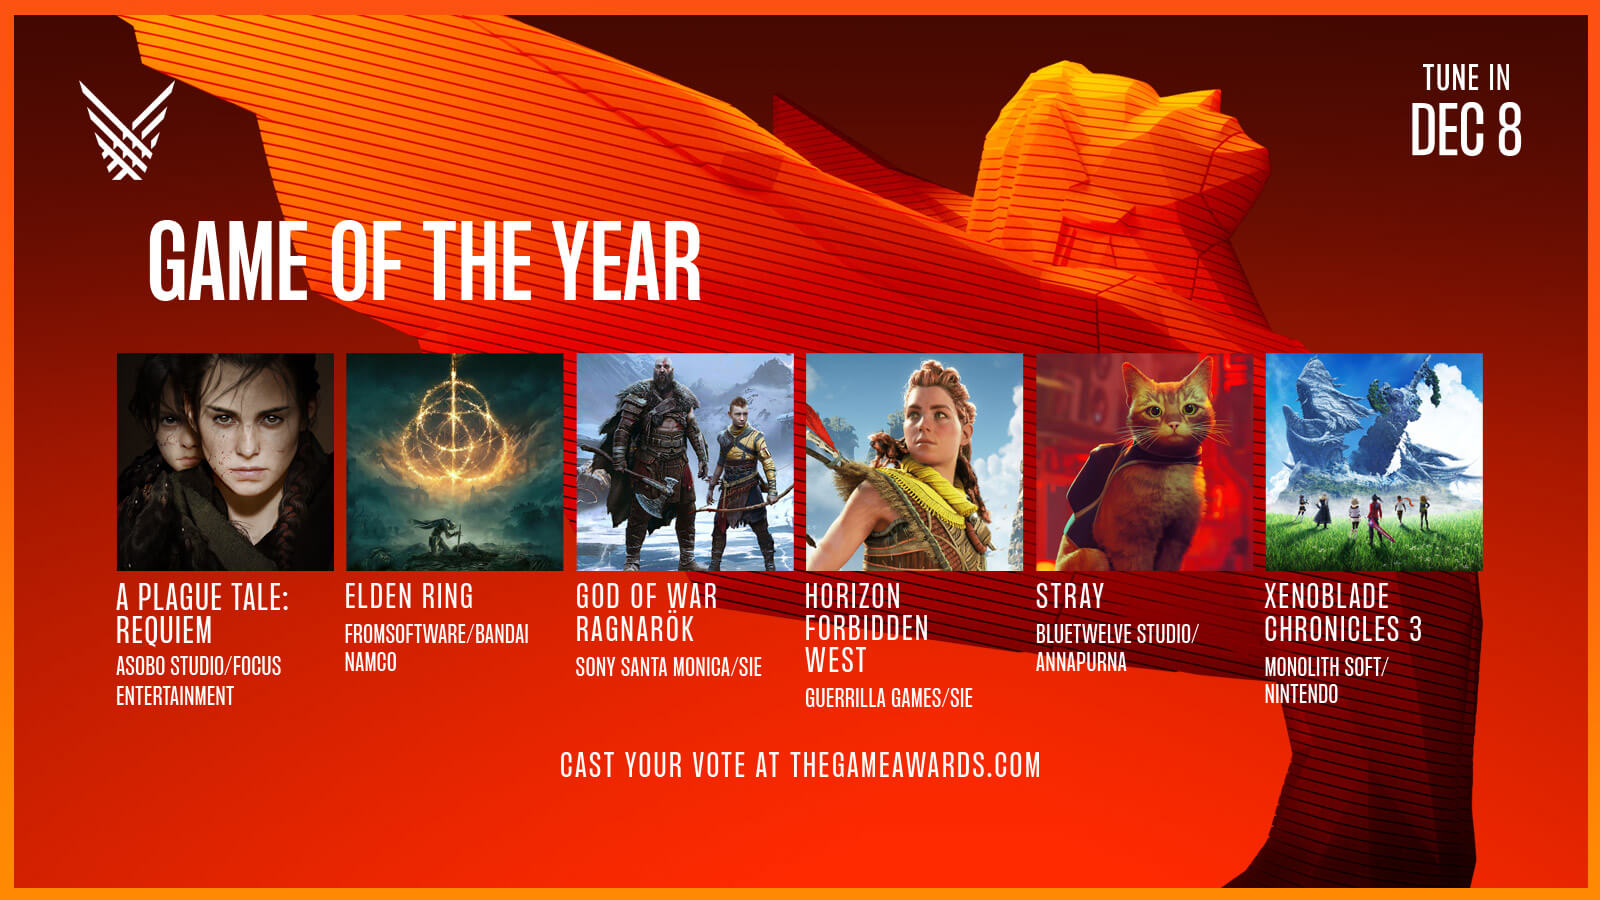 The-Game-Awards-2022-Nominees-Revealed